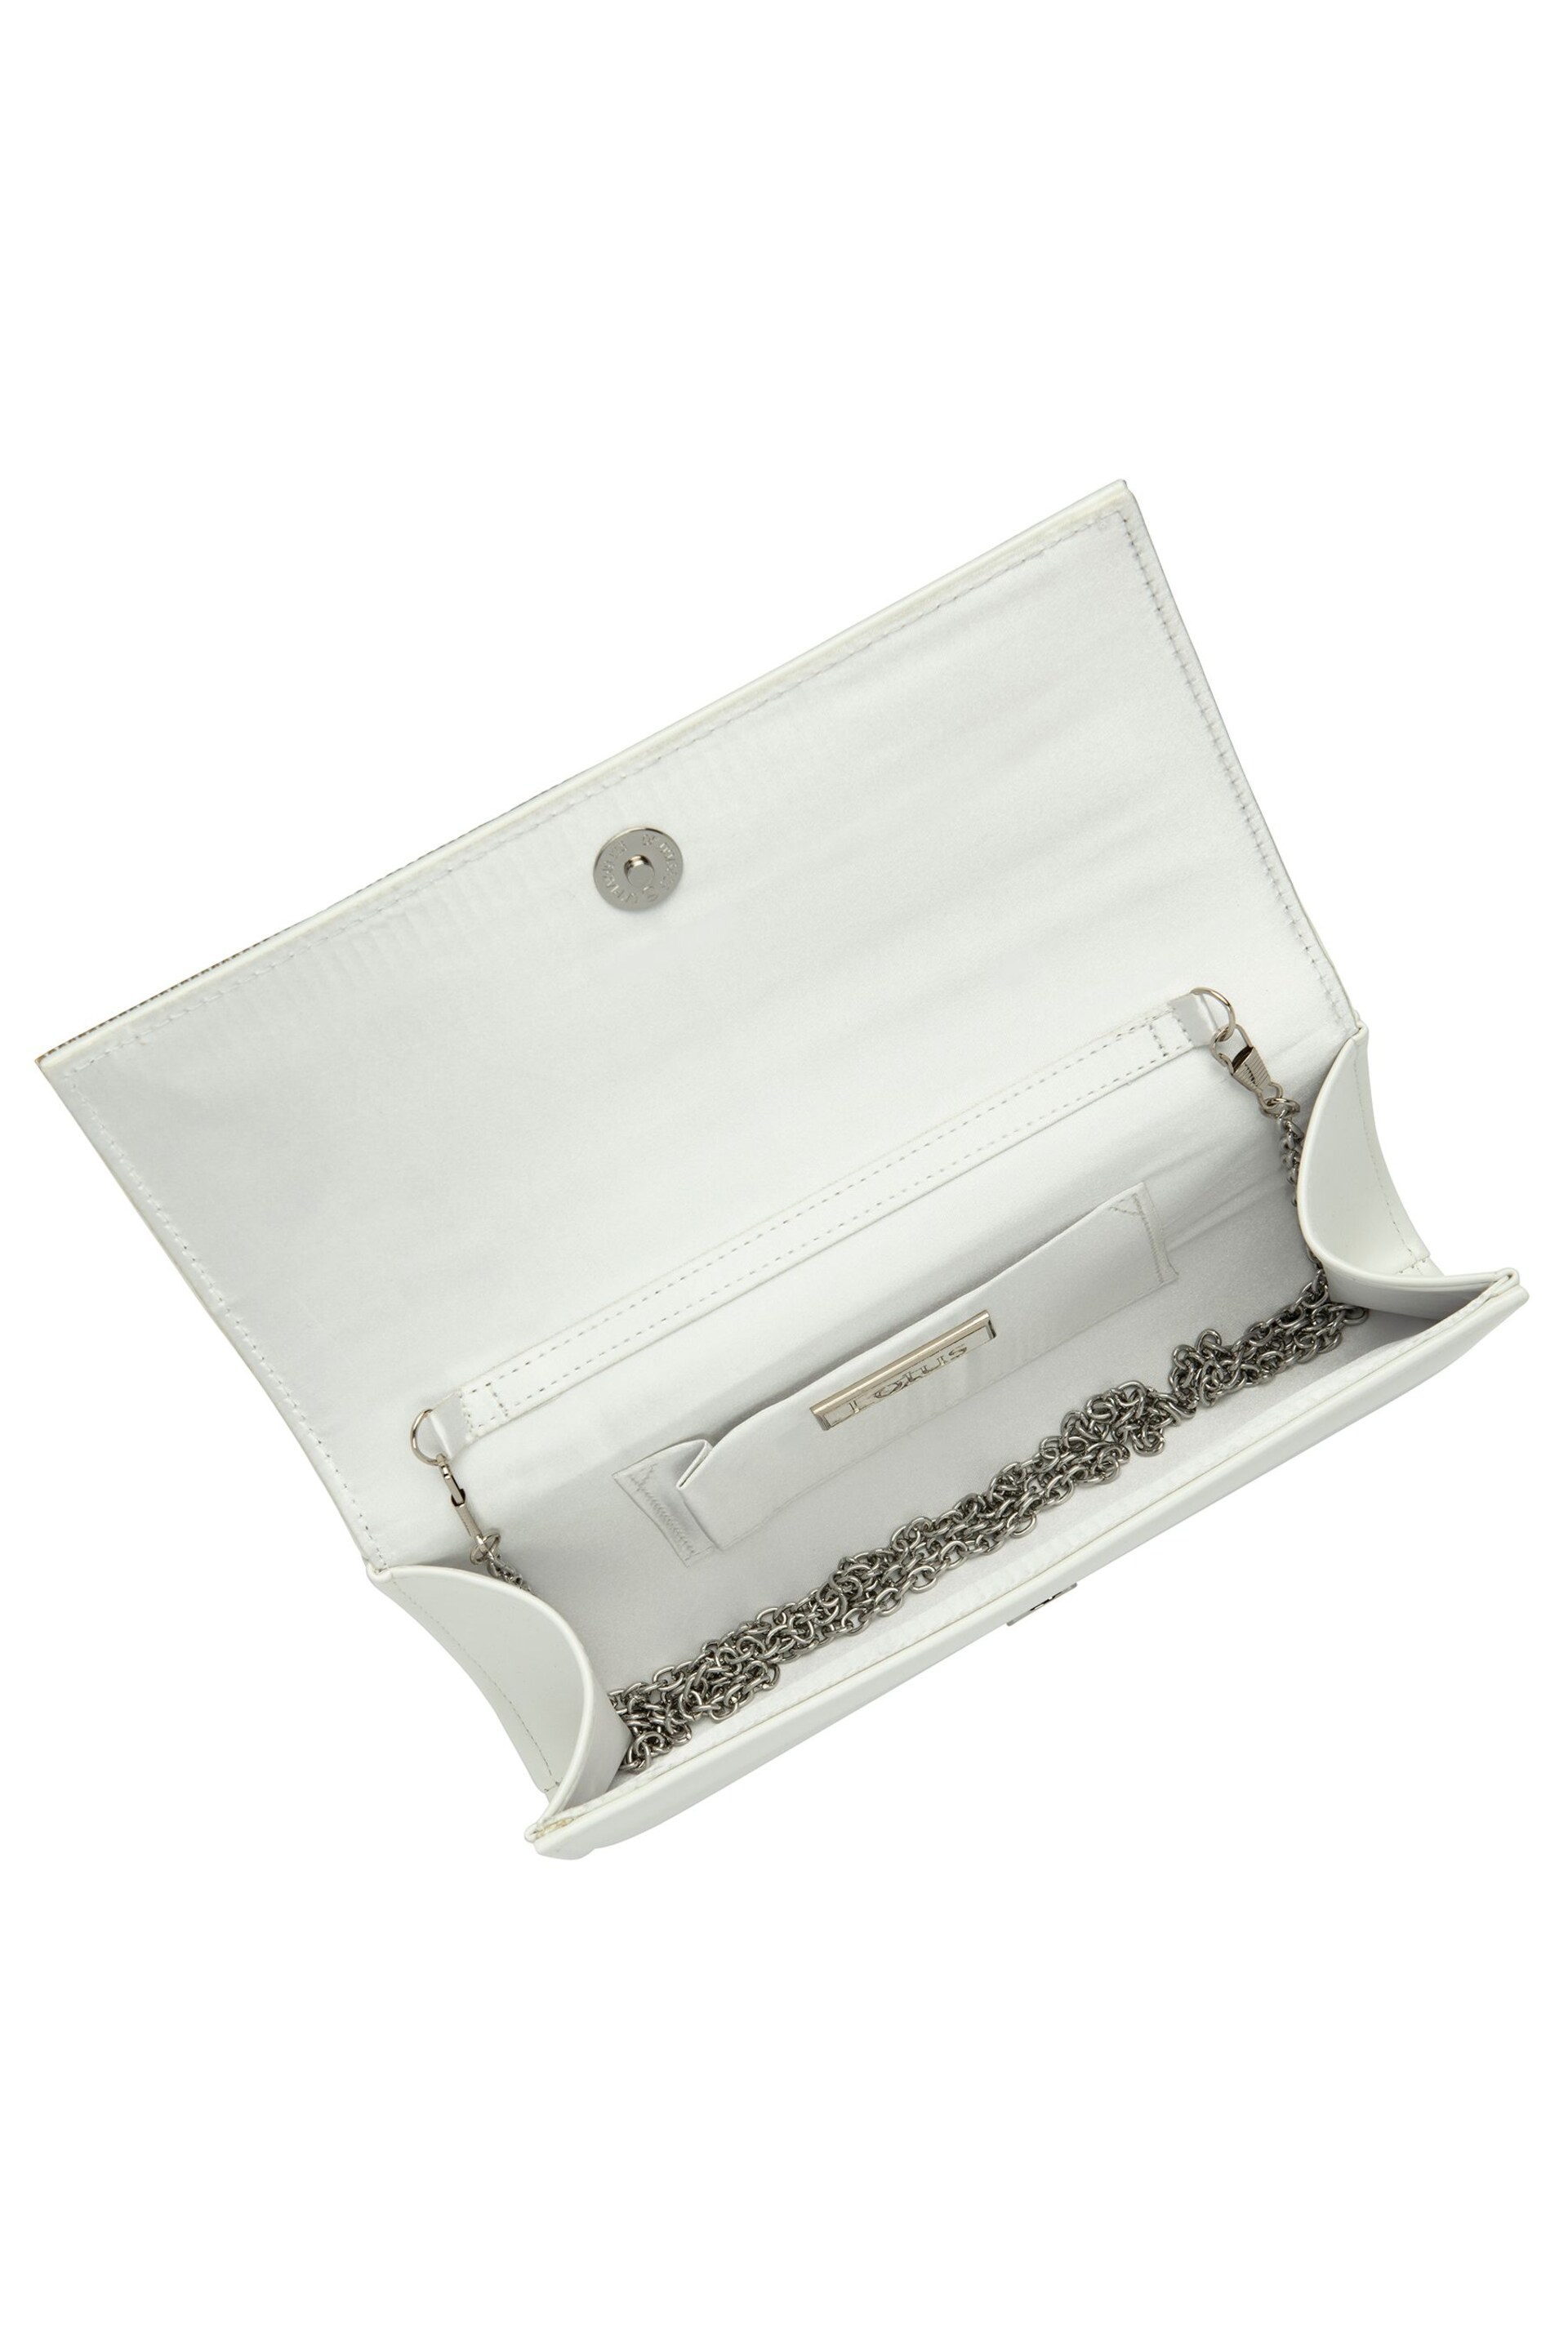 Lotus White Clutch Bag With Chain - Image 4 of 4